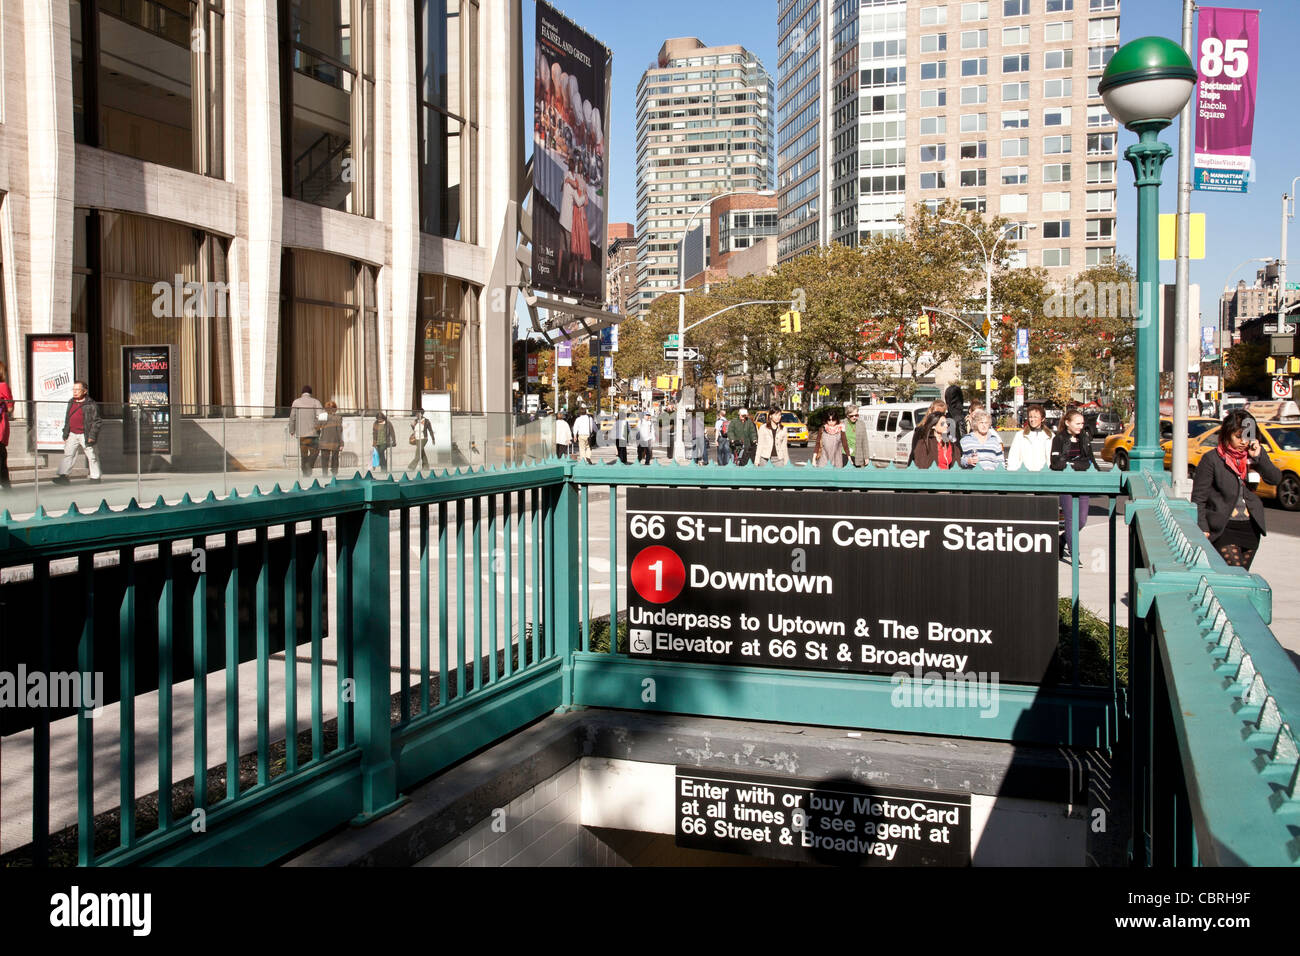 Number 1 Subway Station Entrance, 66th Street at Lincoln Center, NYC Stock Photo